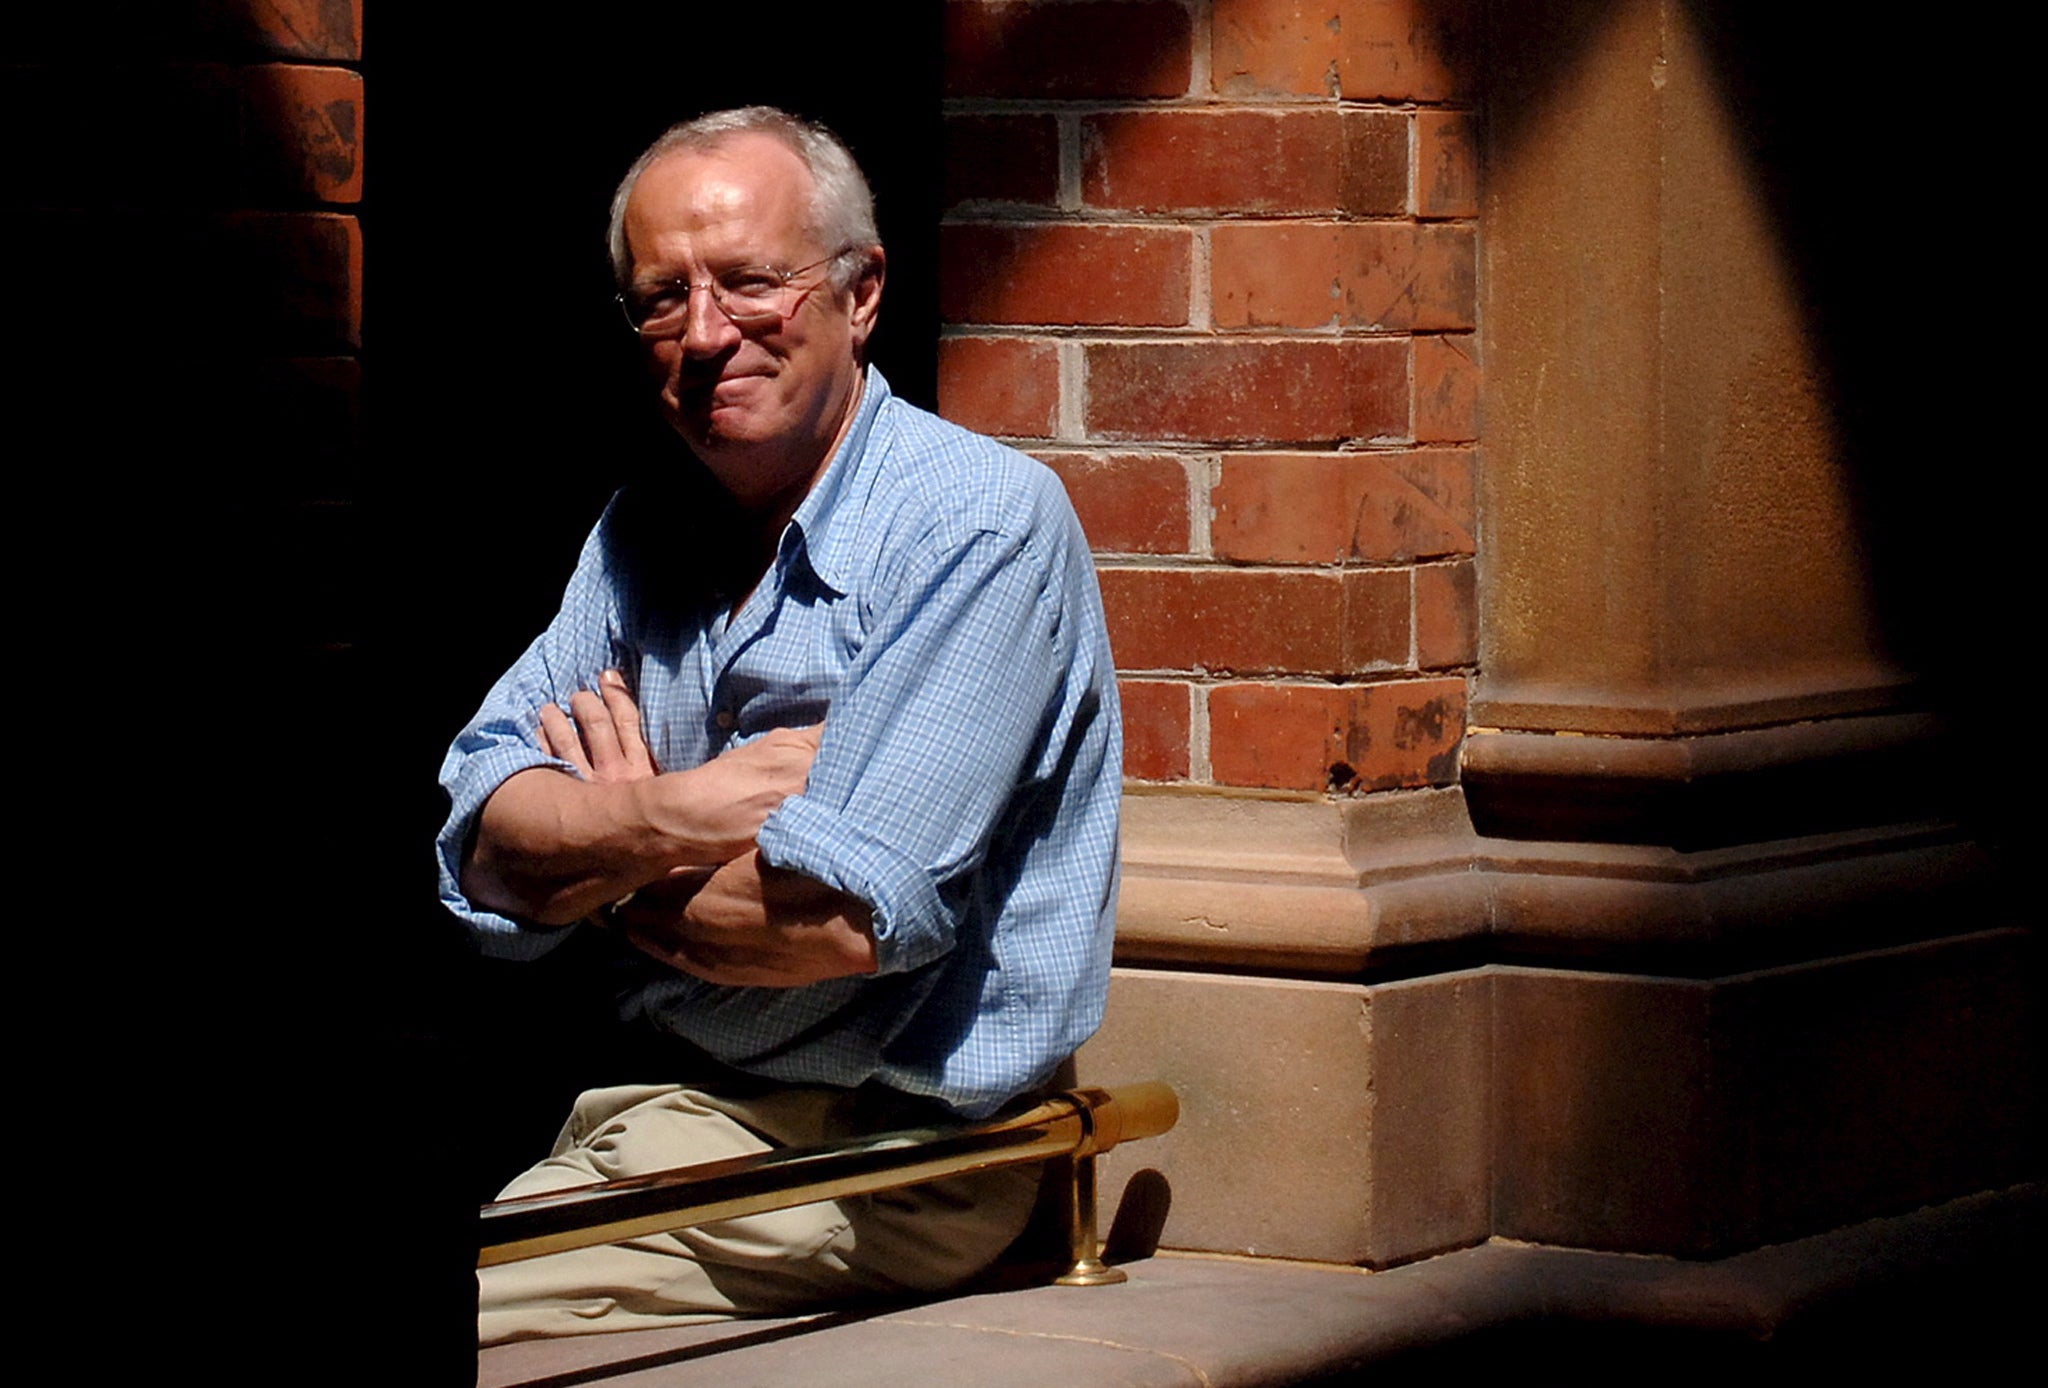 Robert Fisk, long-serving Middle East correspondent at The Independent, has died aged 74